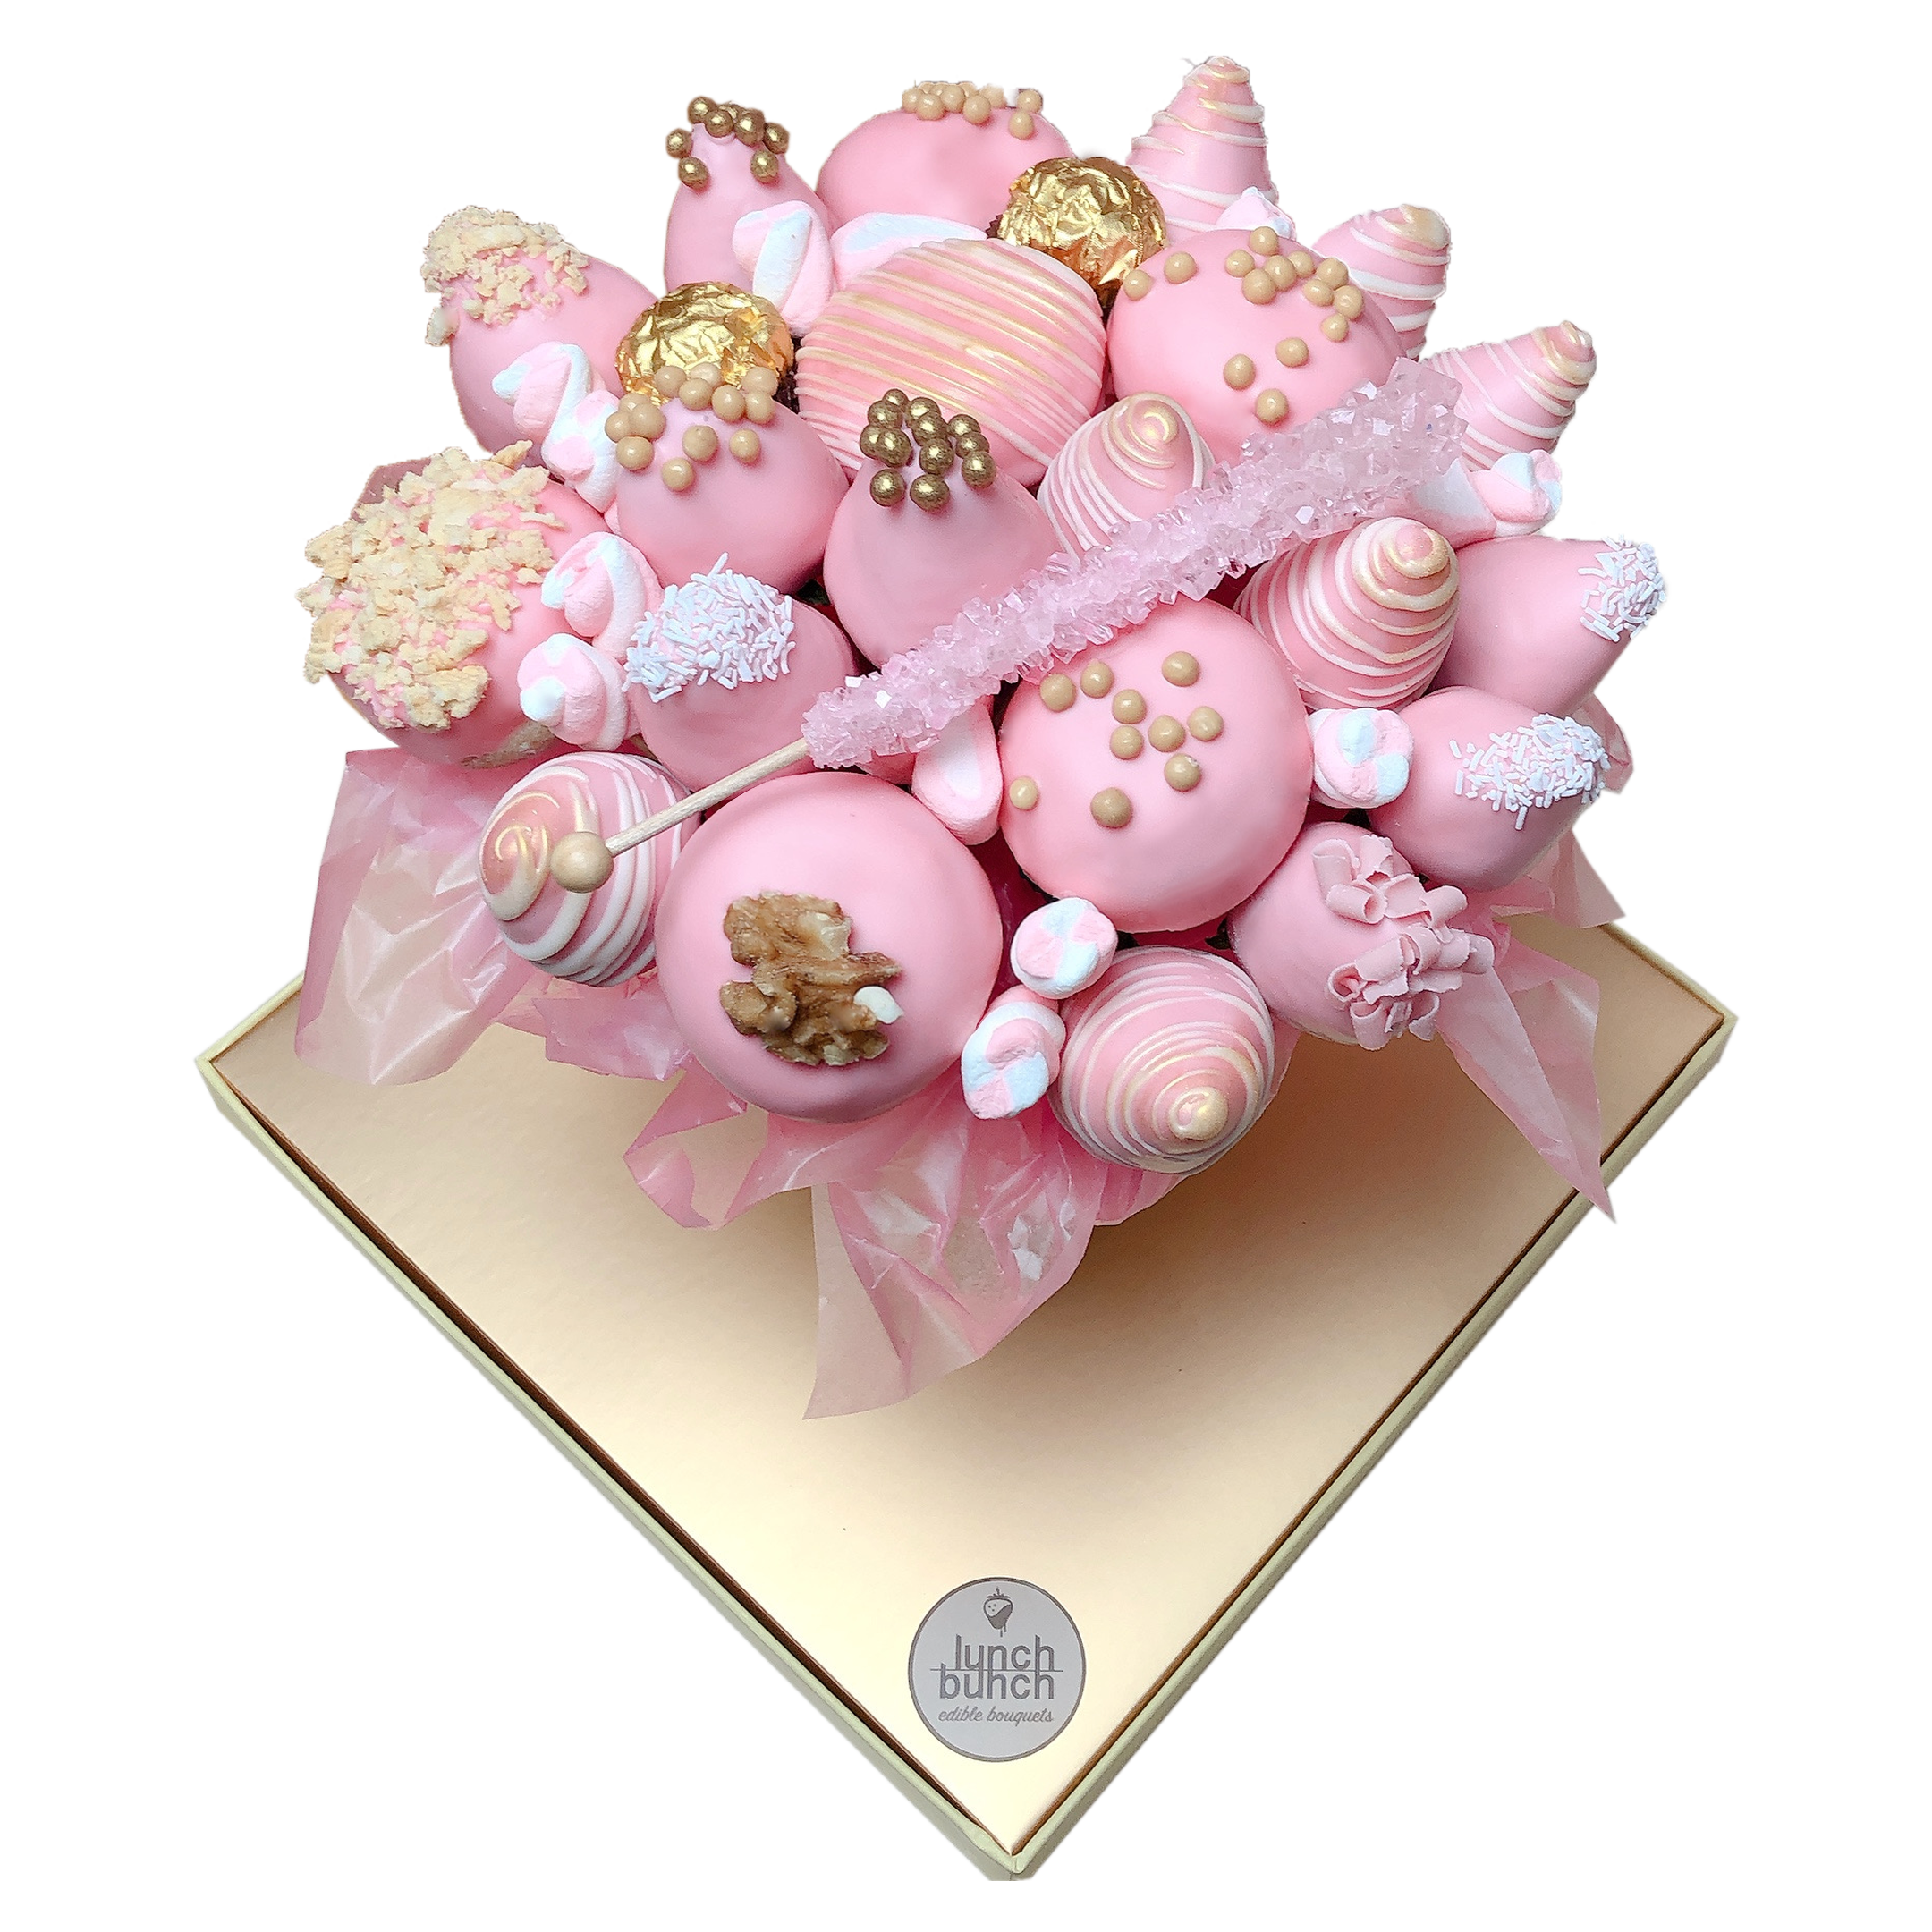 Chocolate Stareberries and Donuts Bouquet is a perfect birthday gift for a female or a girl